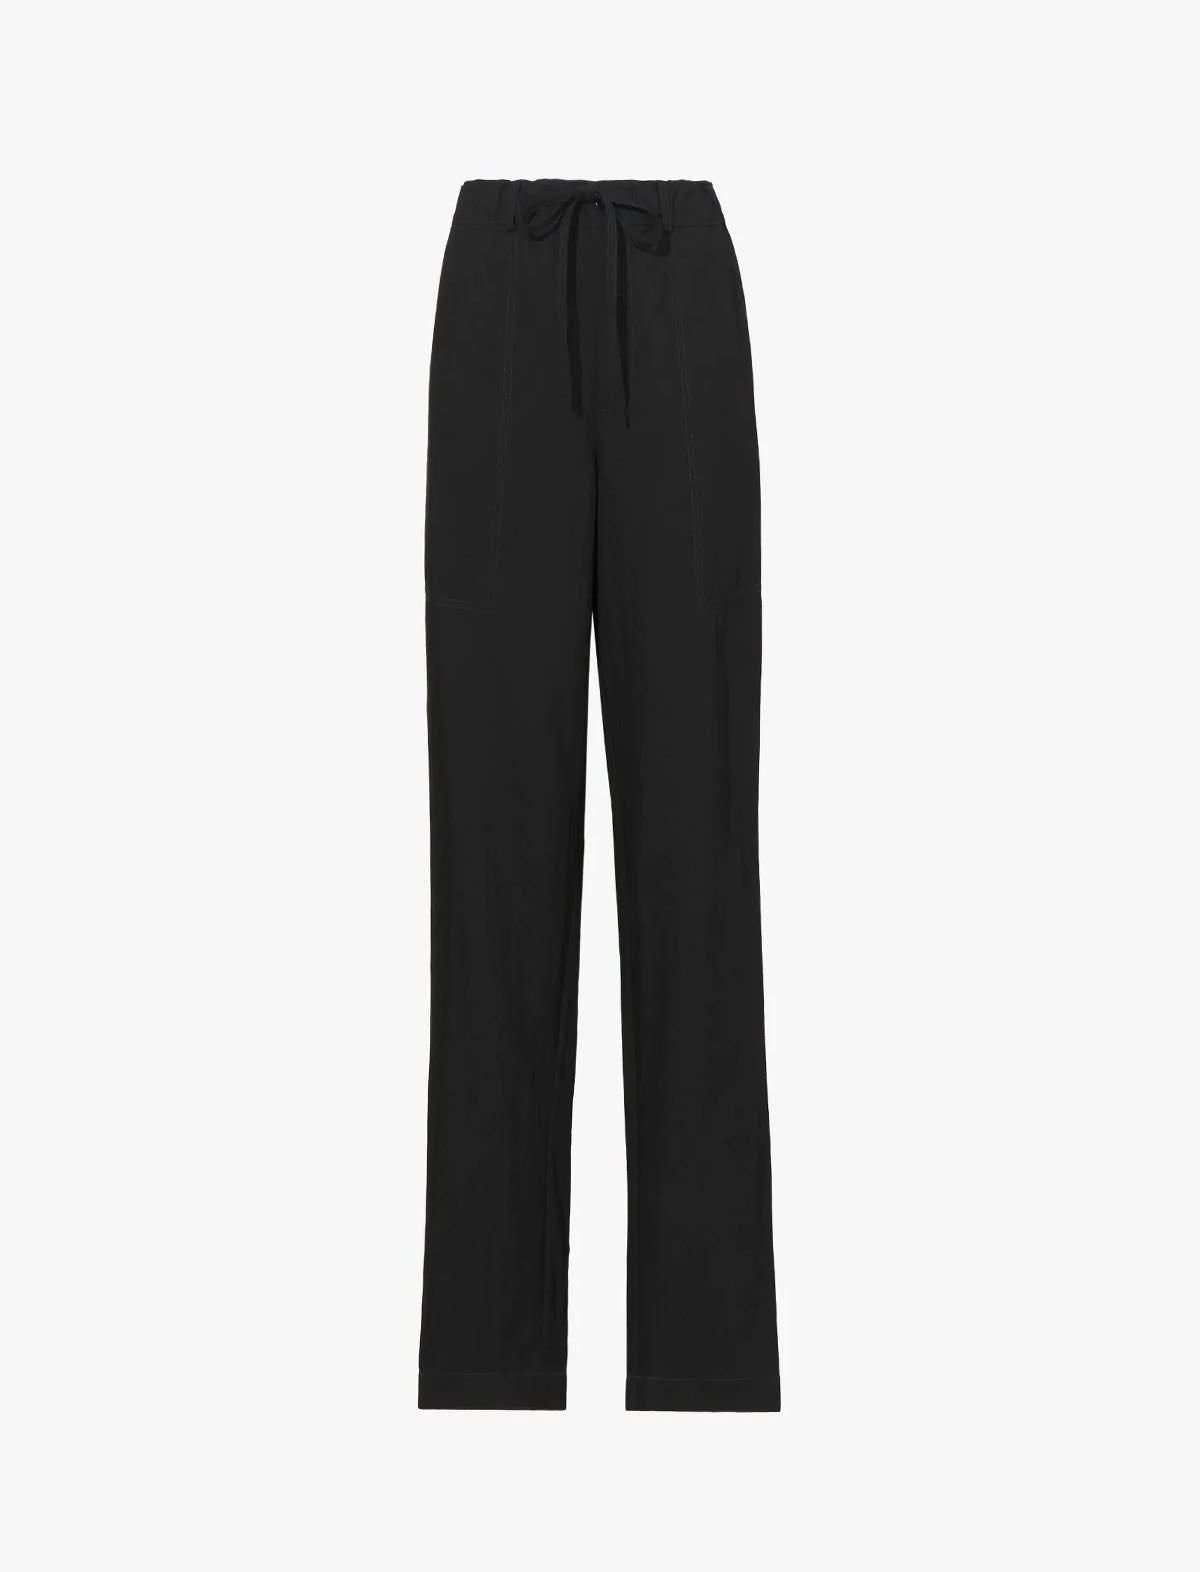 PROENZA SCHOULER WHITE LABEL Slouchy Pant In Black